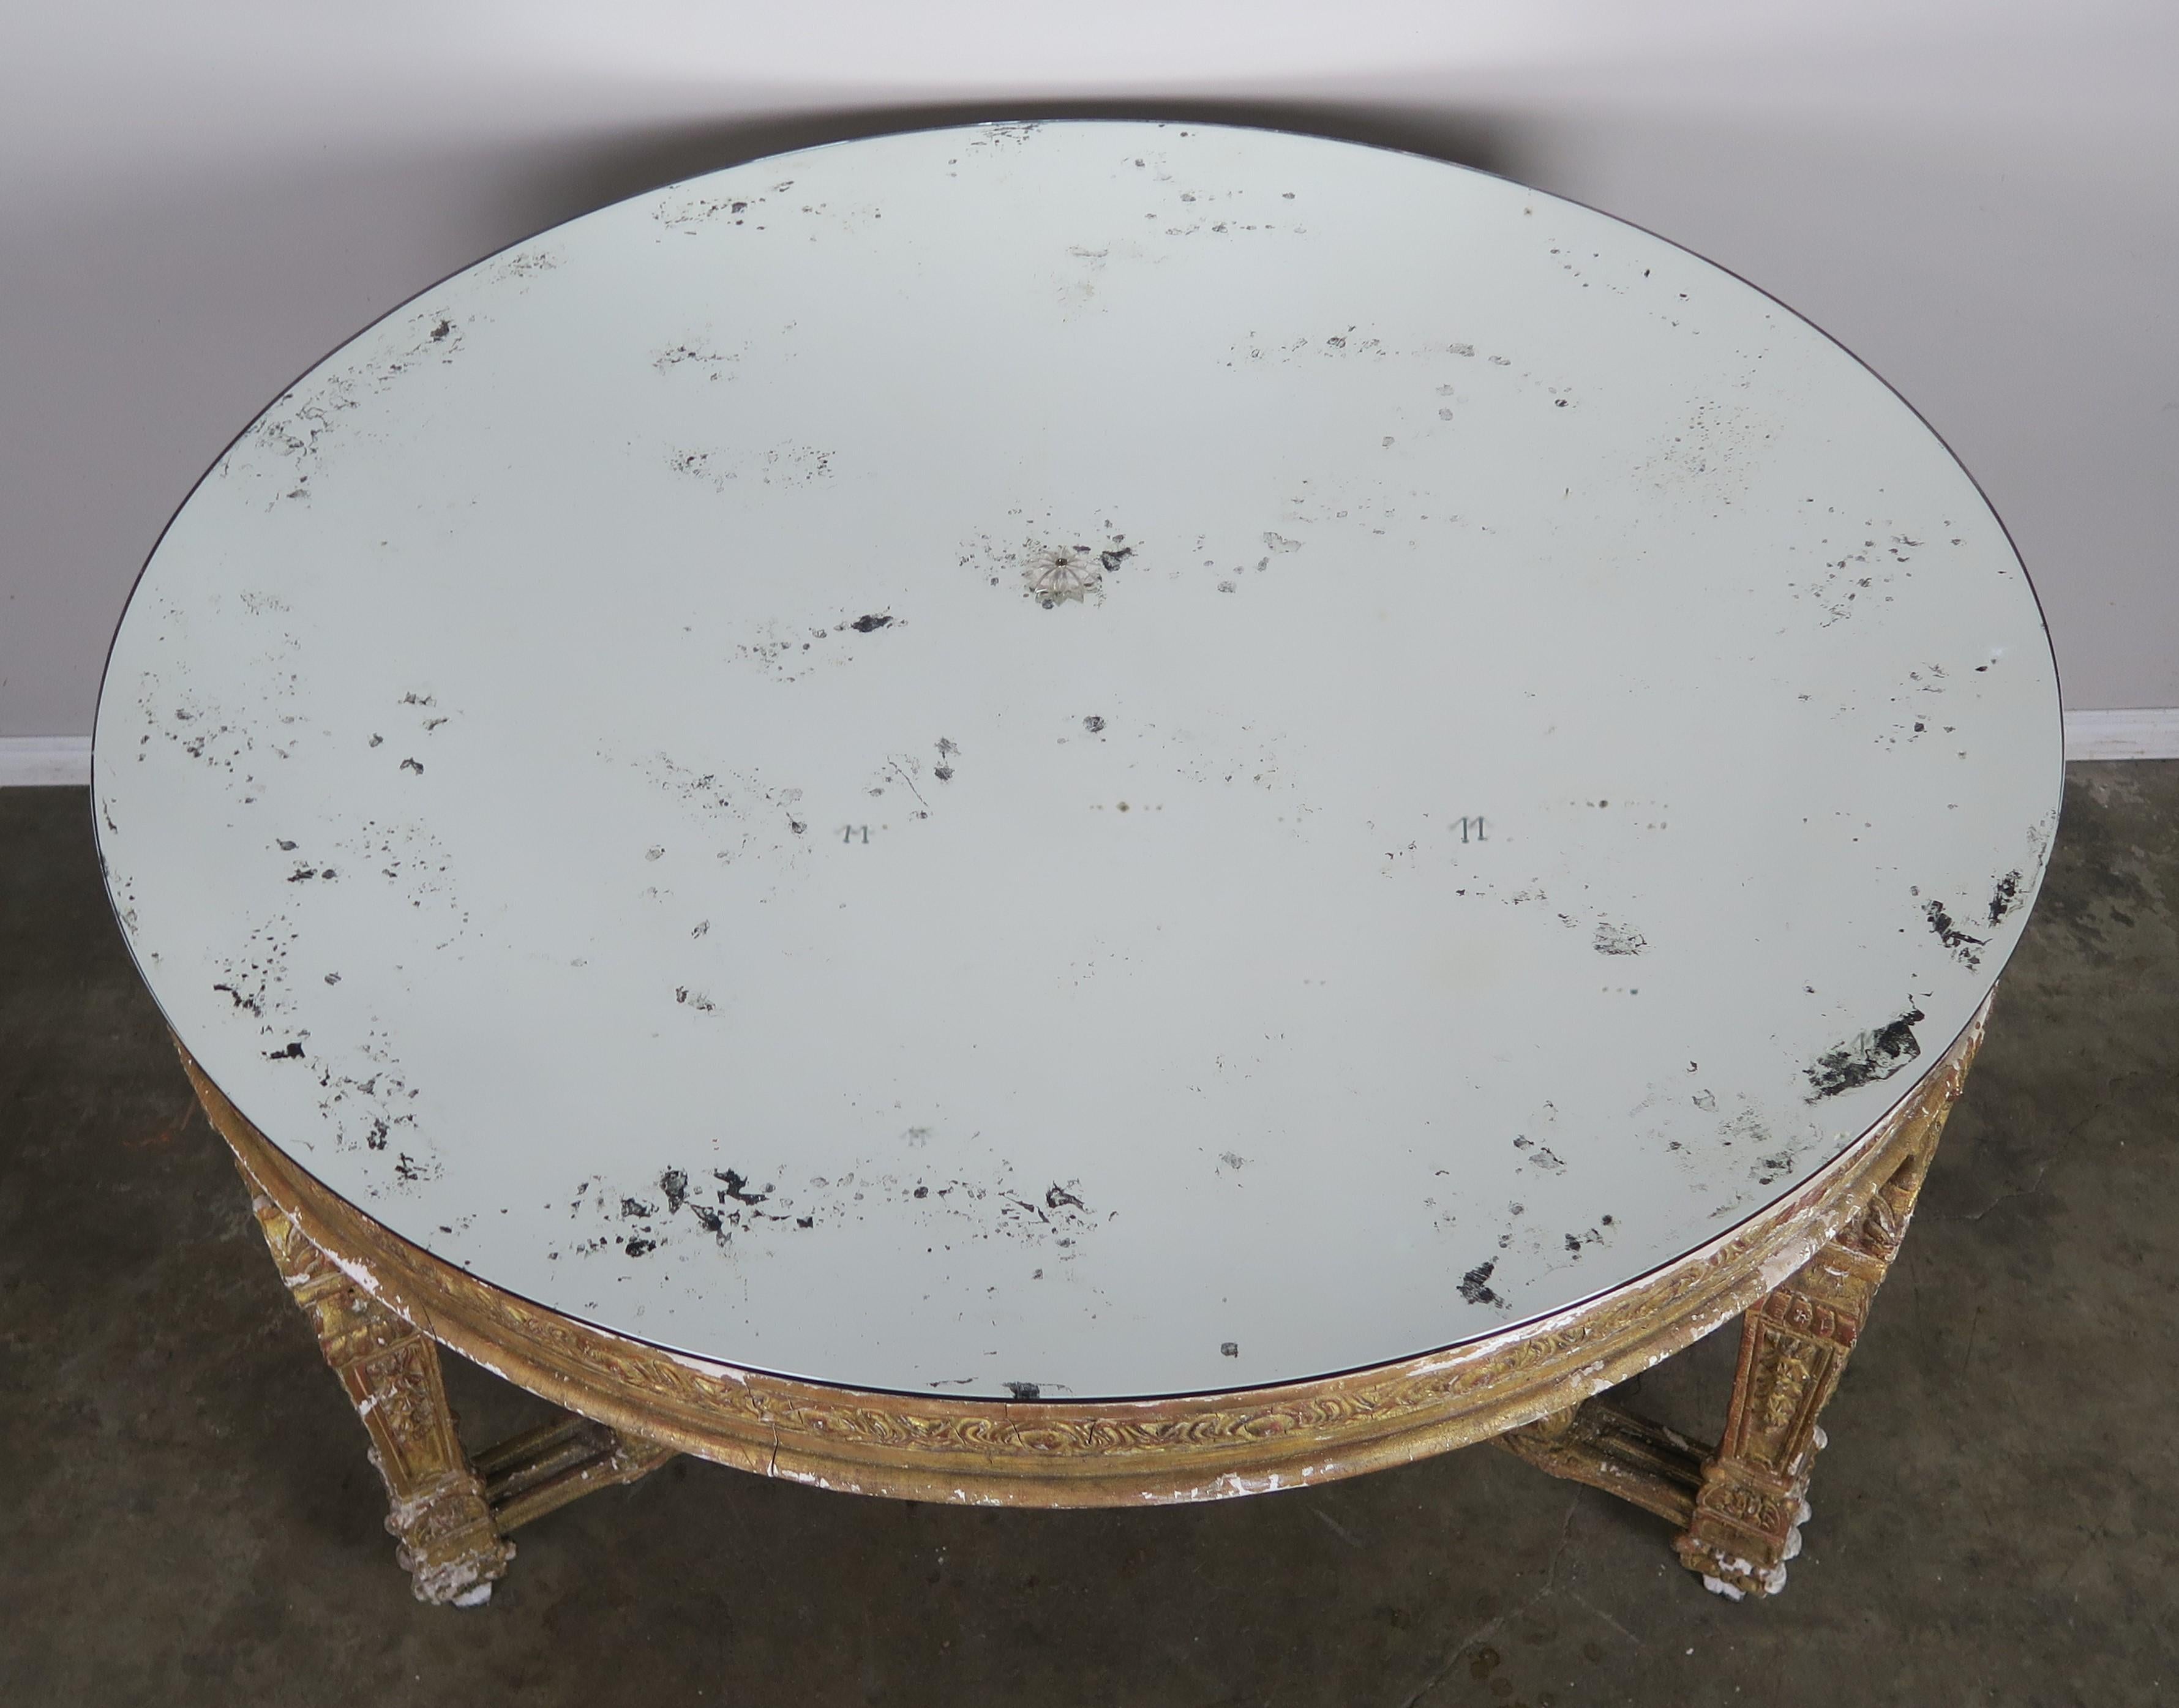 Italian neoclassical style giltwood center table standing on three straight legs that join together with a bottom stretcher. Antique mirrored top with center rosette.